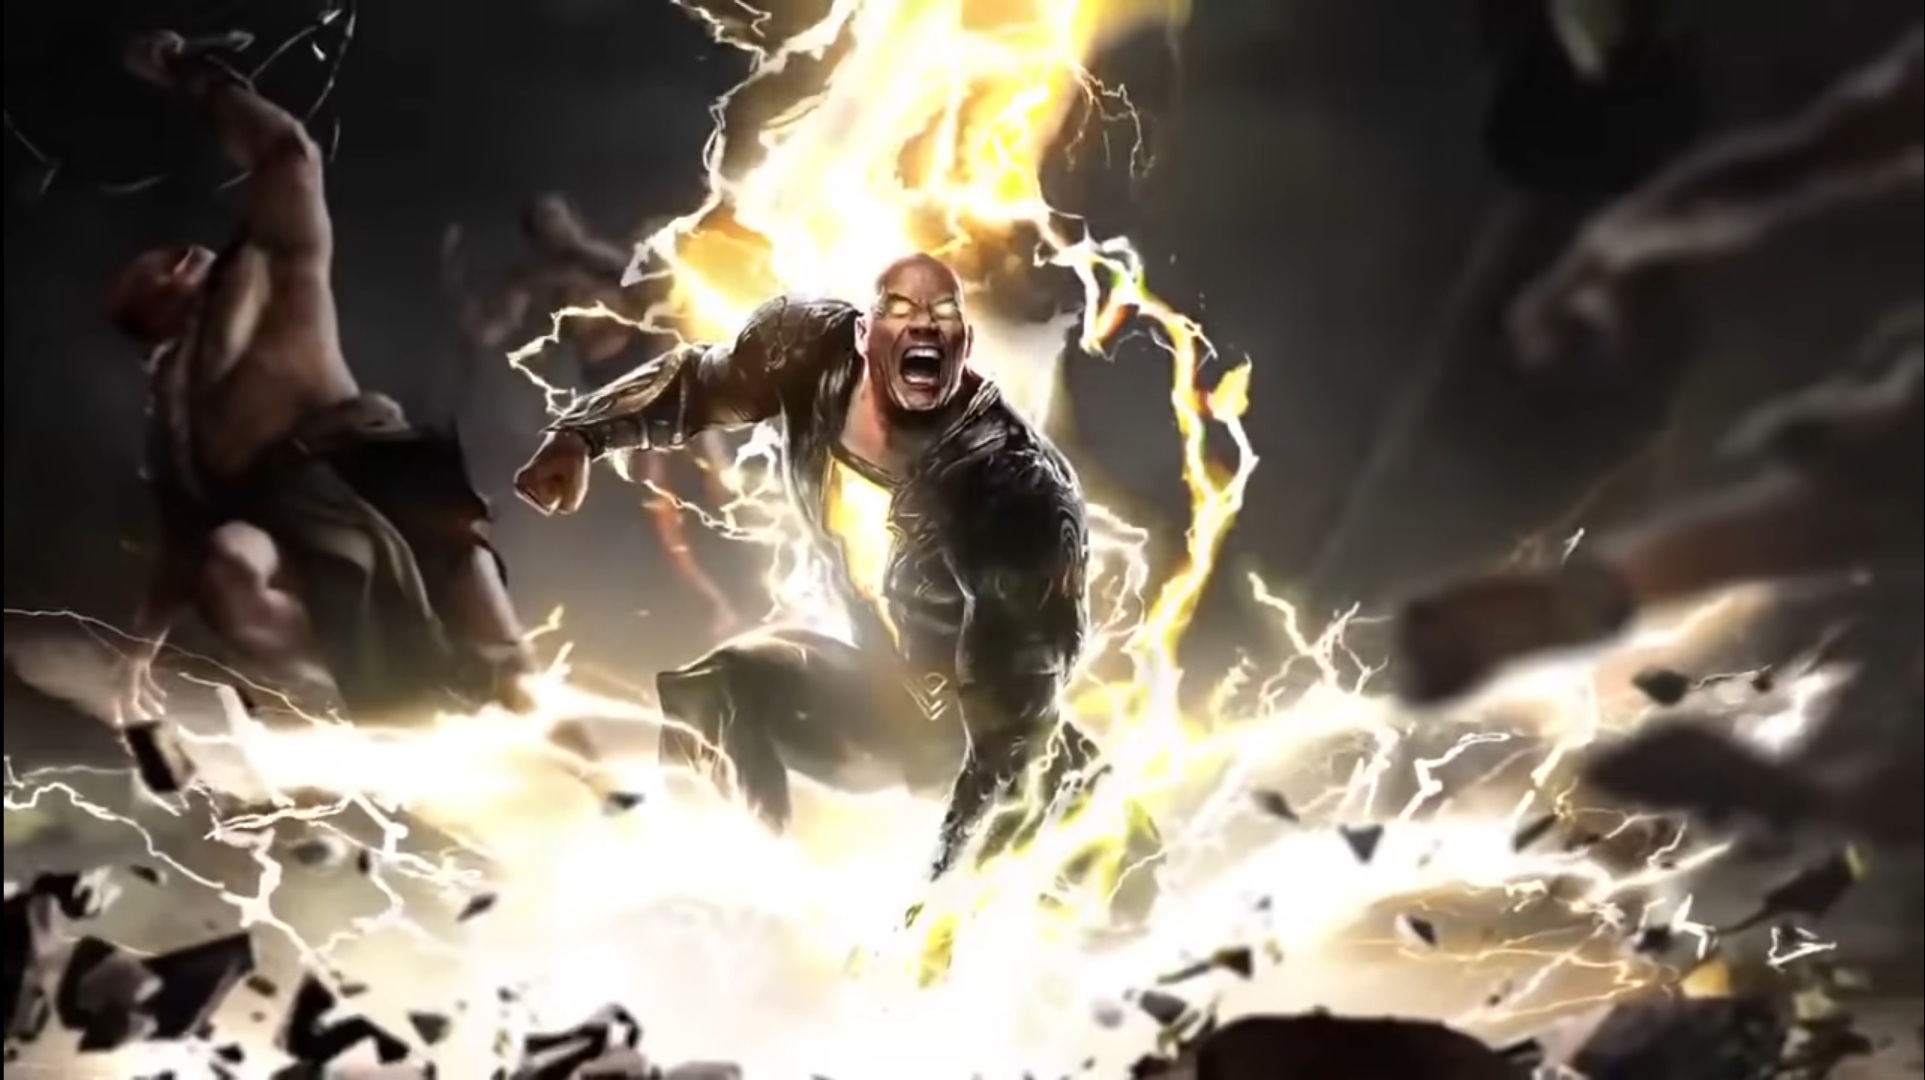 Everything We Know About Black Adam